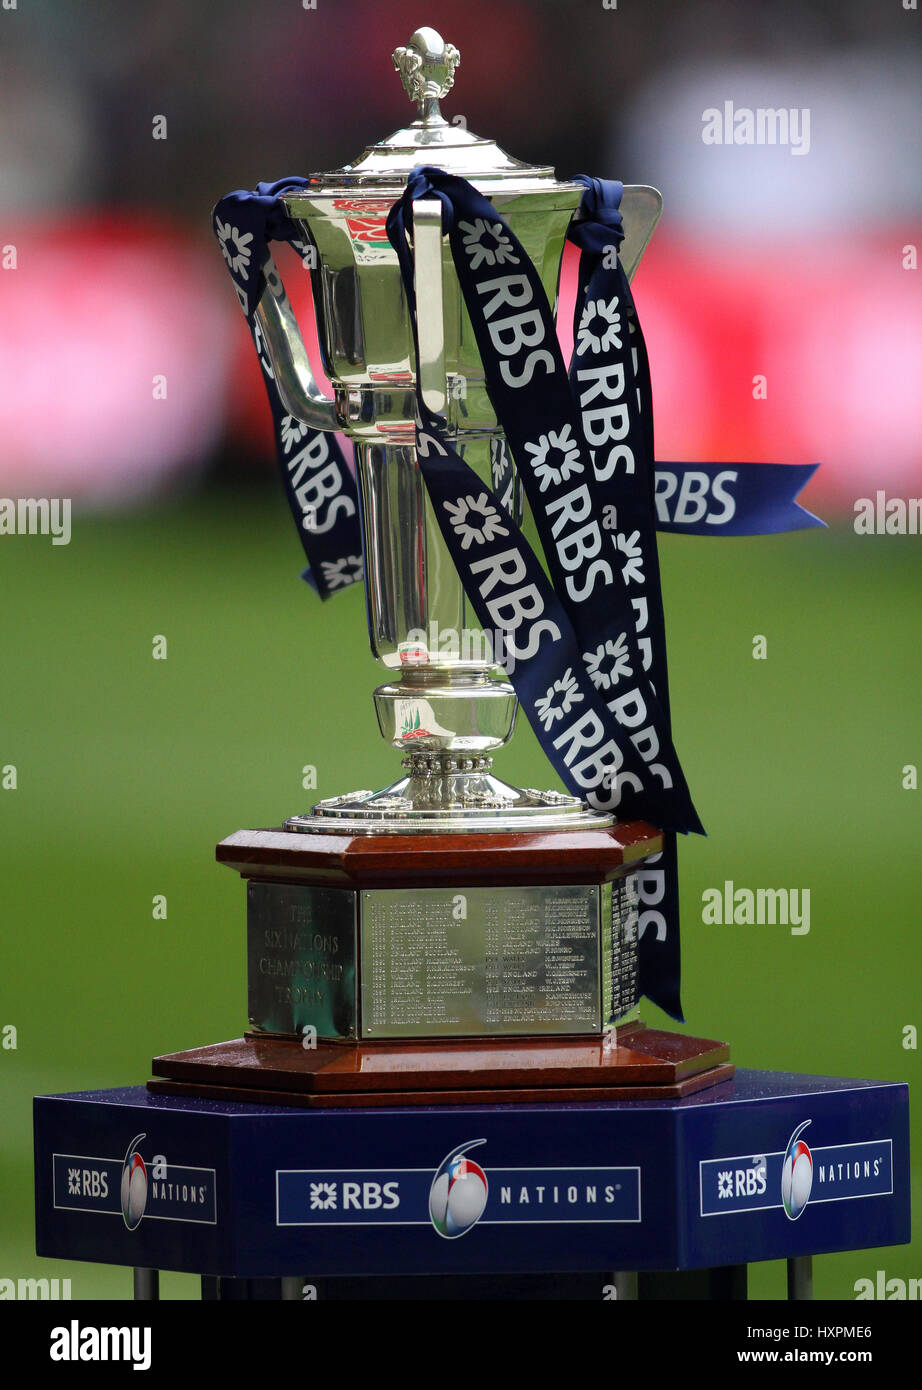 SIX NATIONS TROPHY RUGBY CUP LONDON ENGLAND UK 10 March 2013 Stock Photo